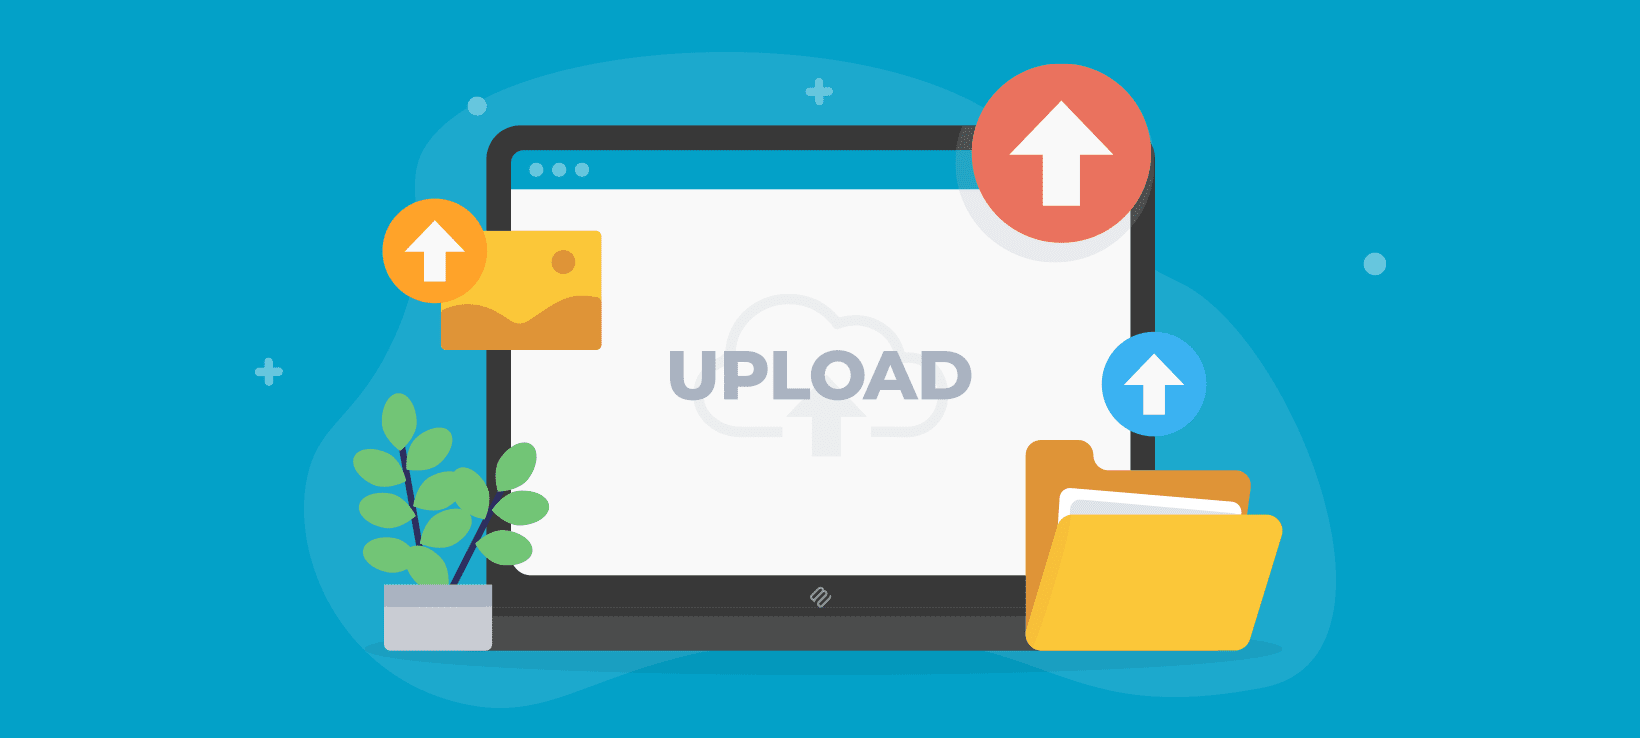 a guide on how to upload files to wordpress header.png